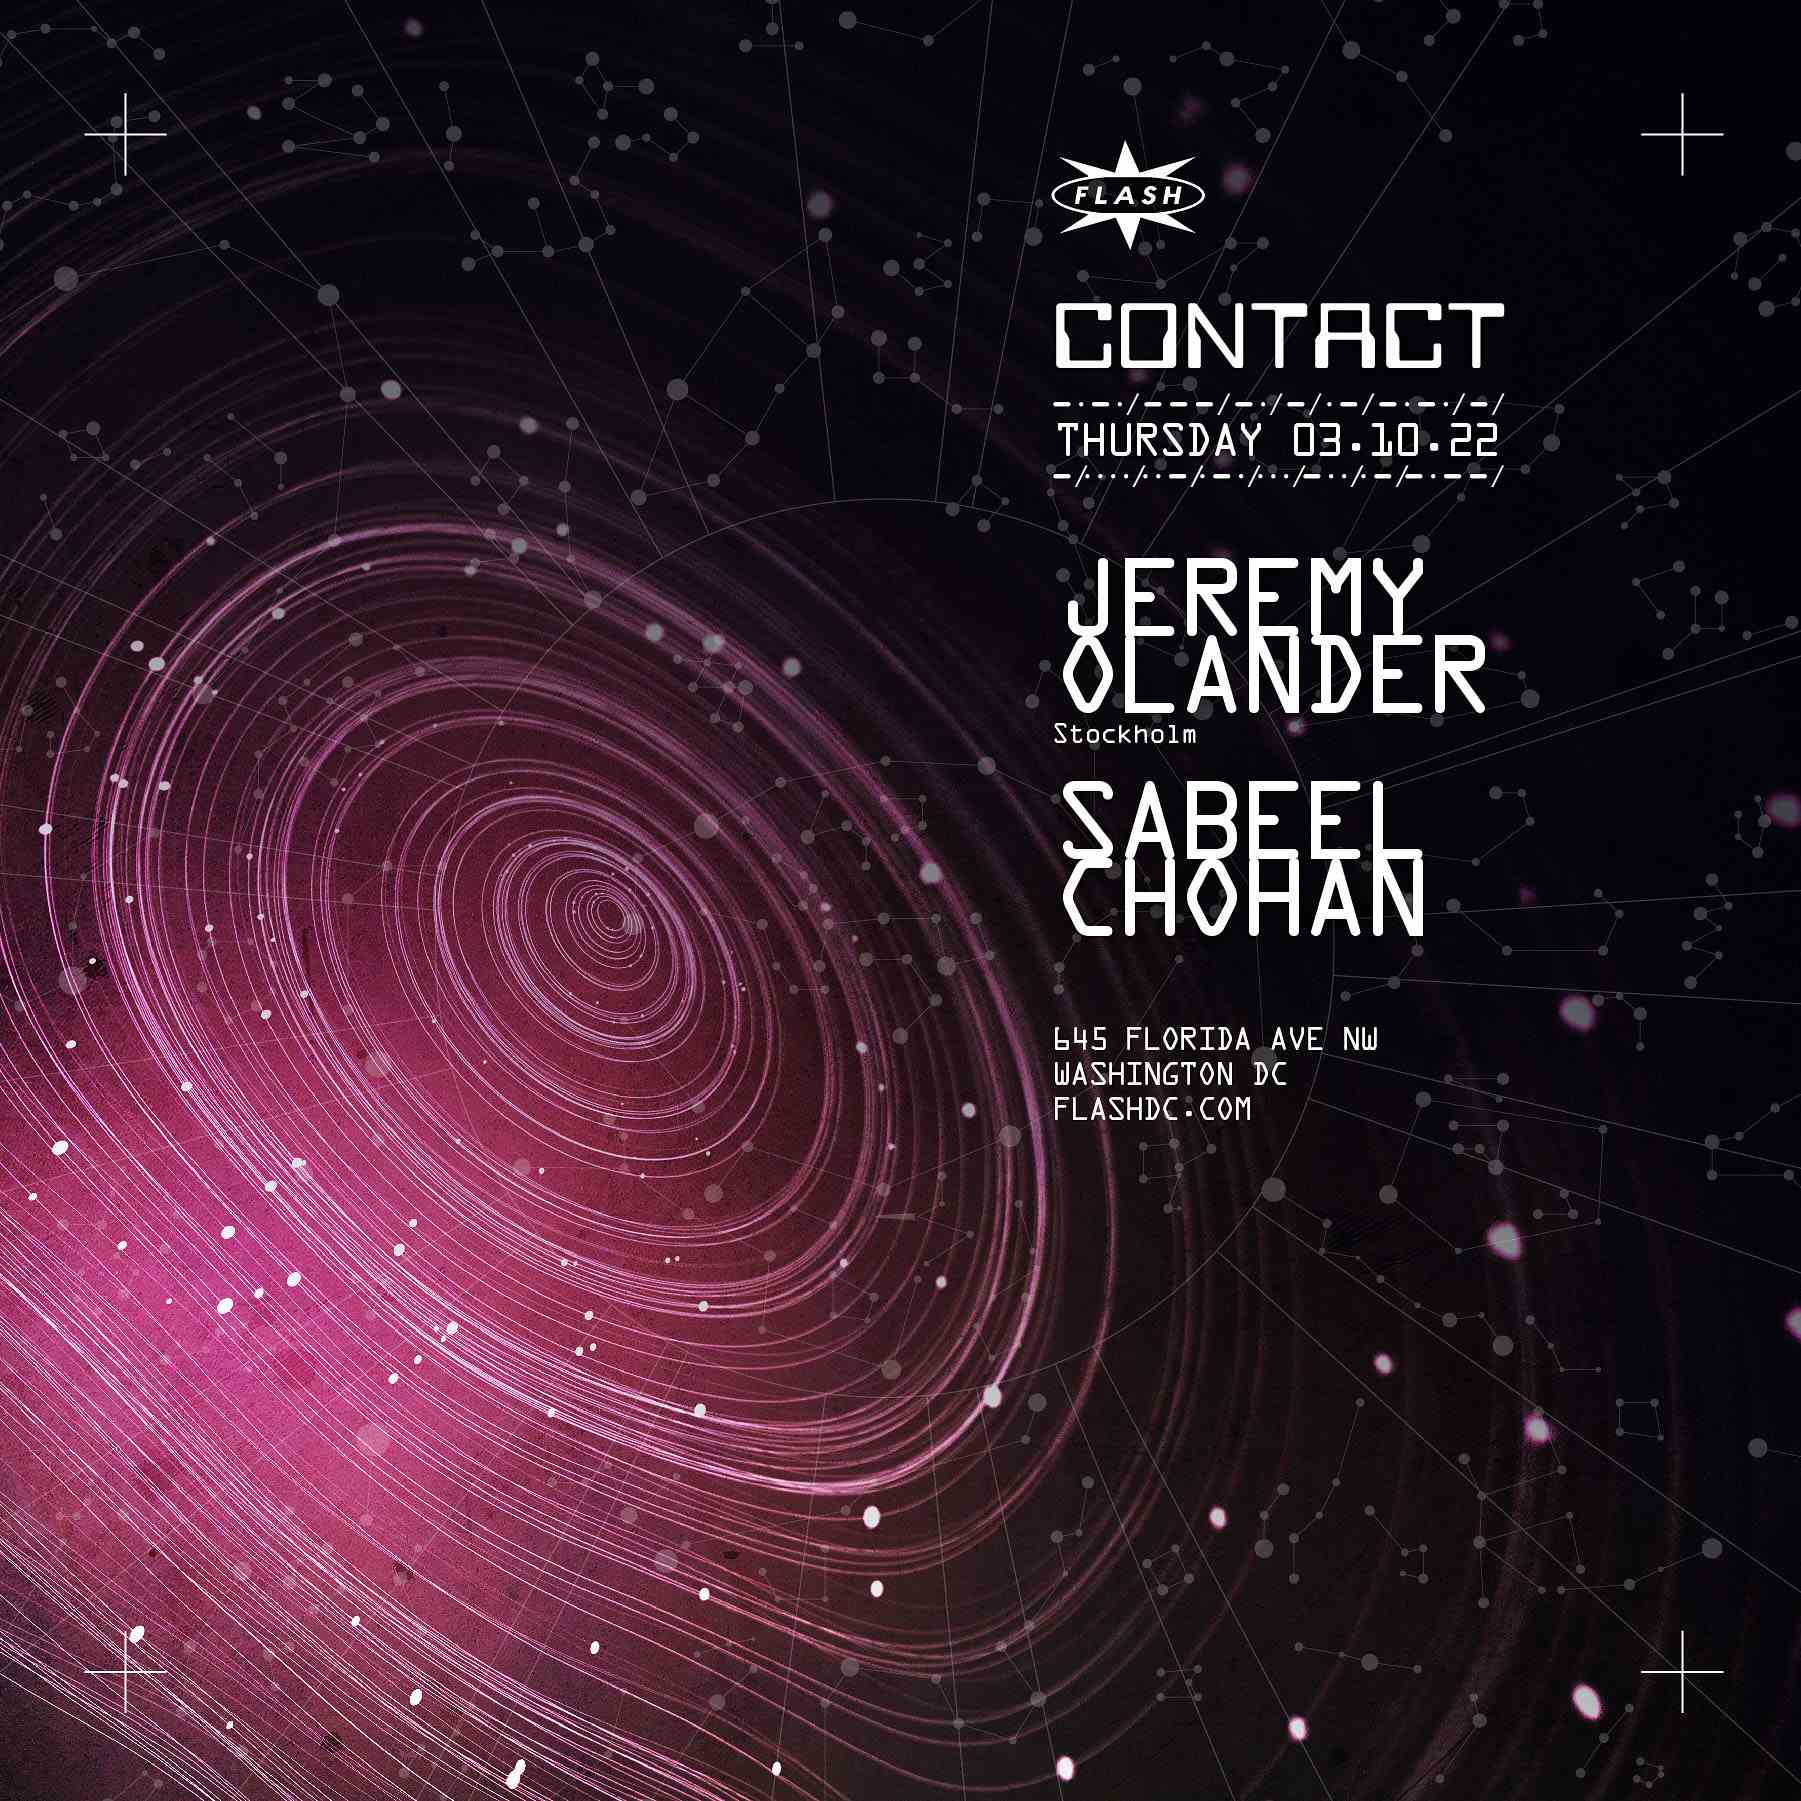 Event image for CONTACT: Jeremy Olander